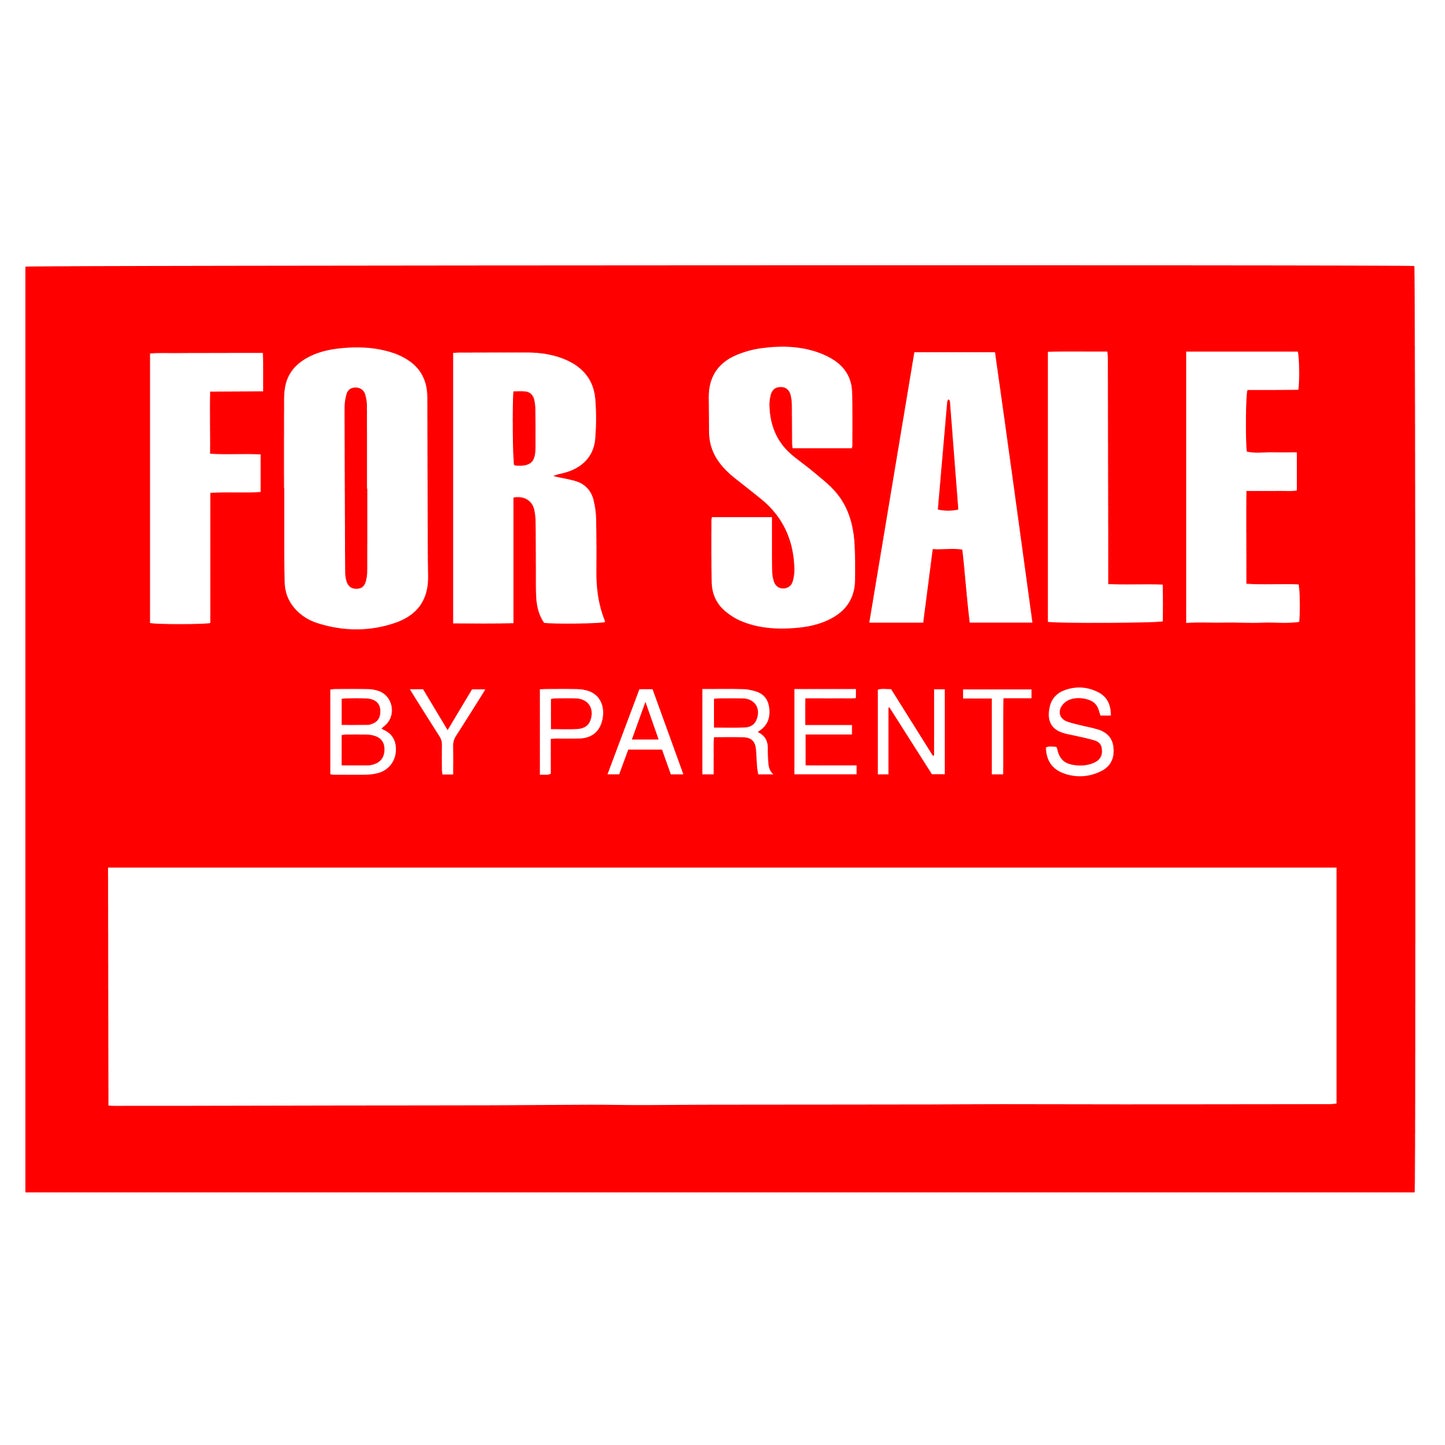 For Sale By Parents